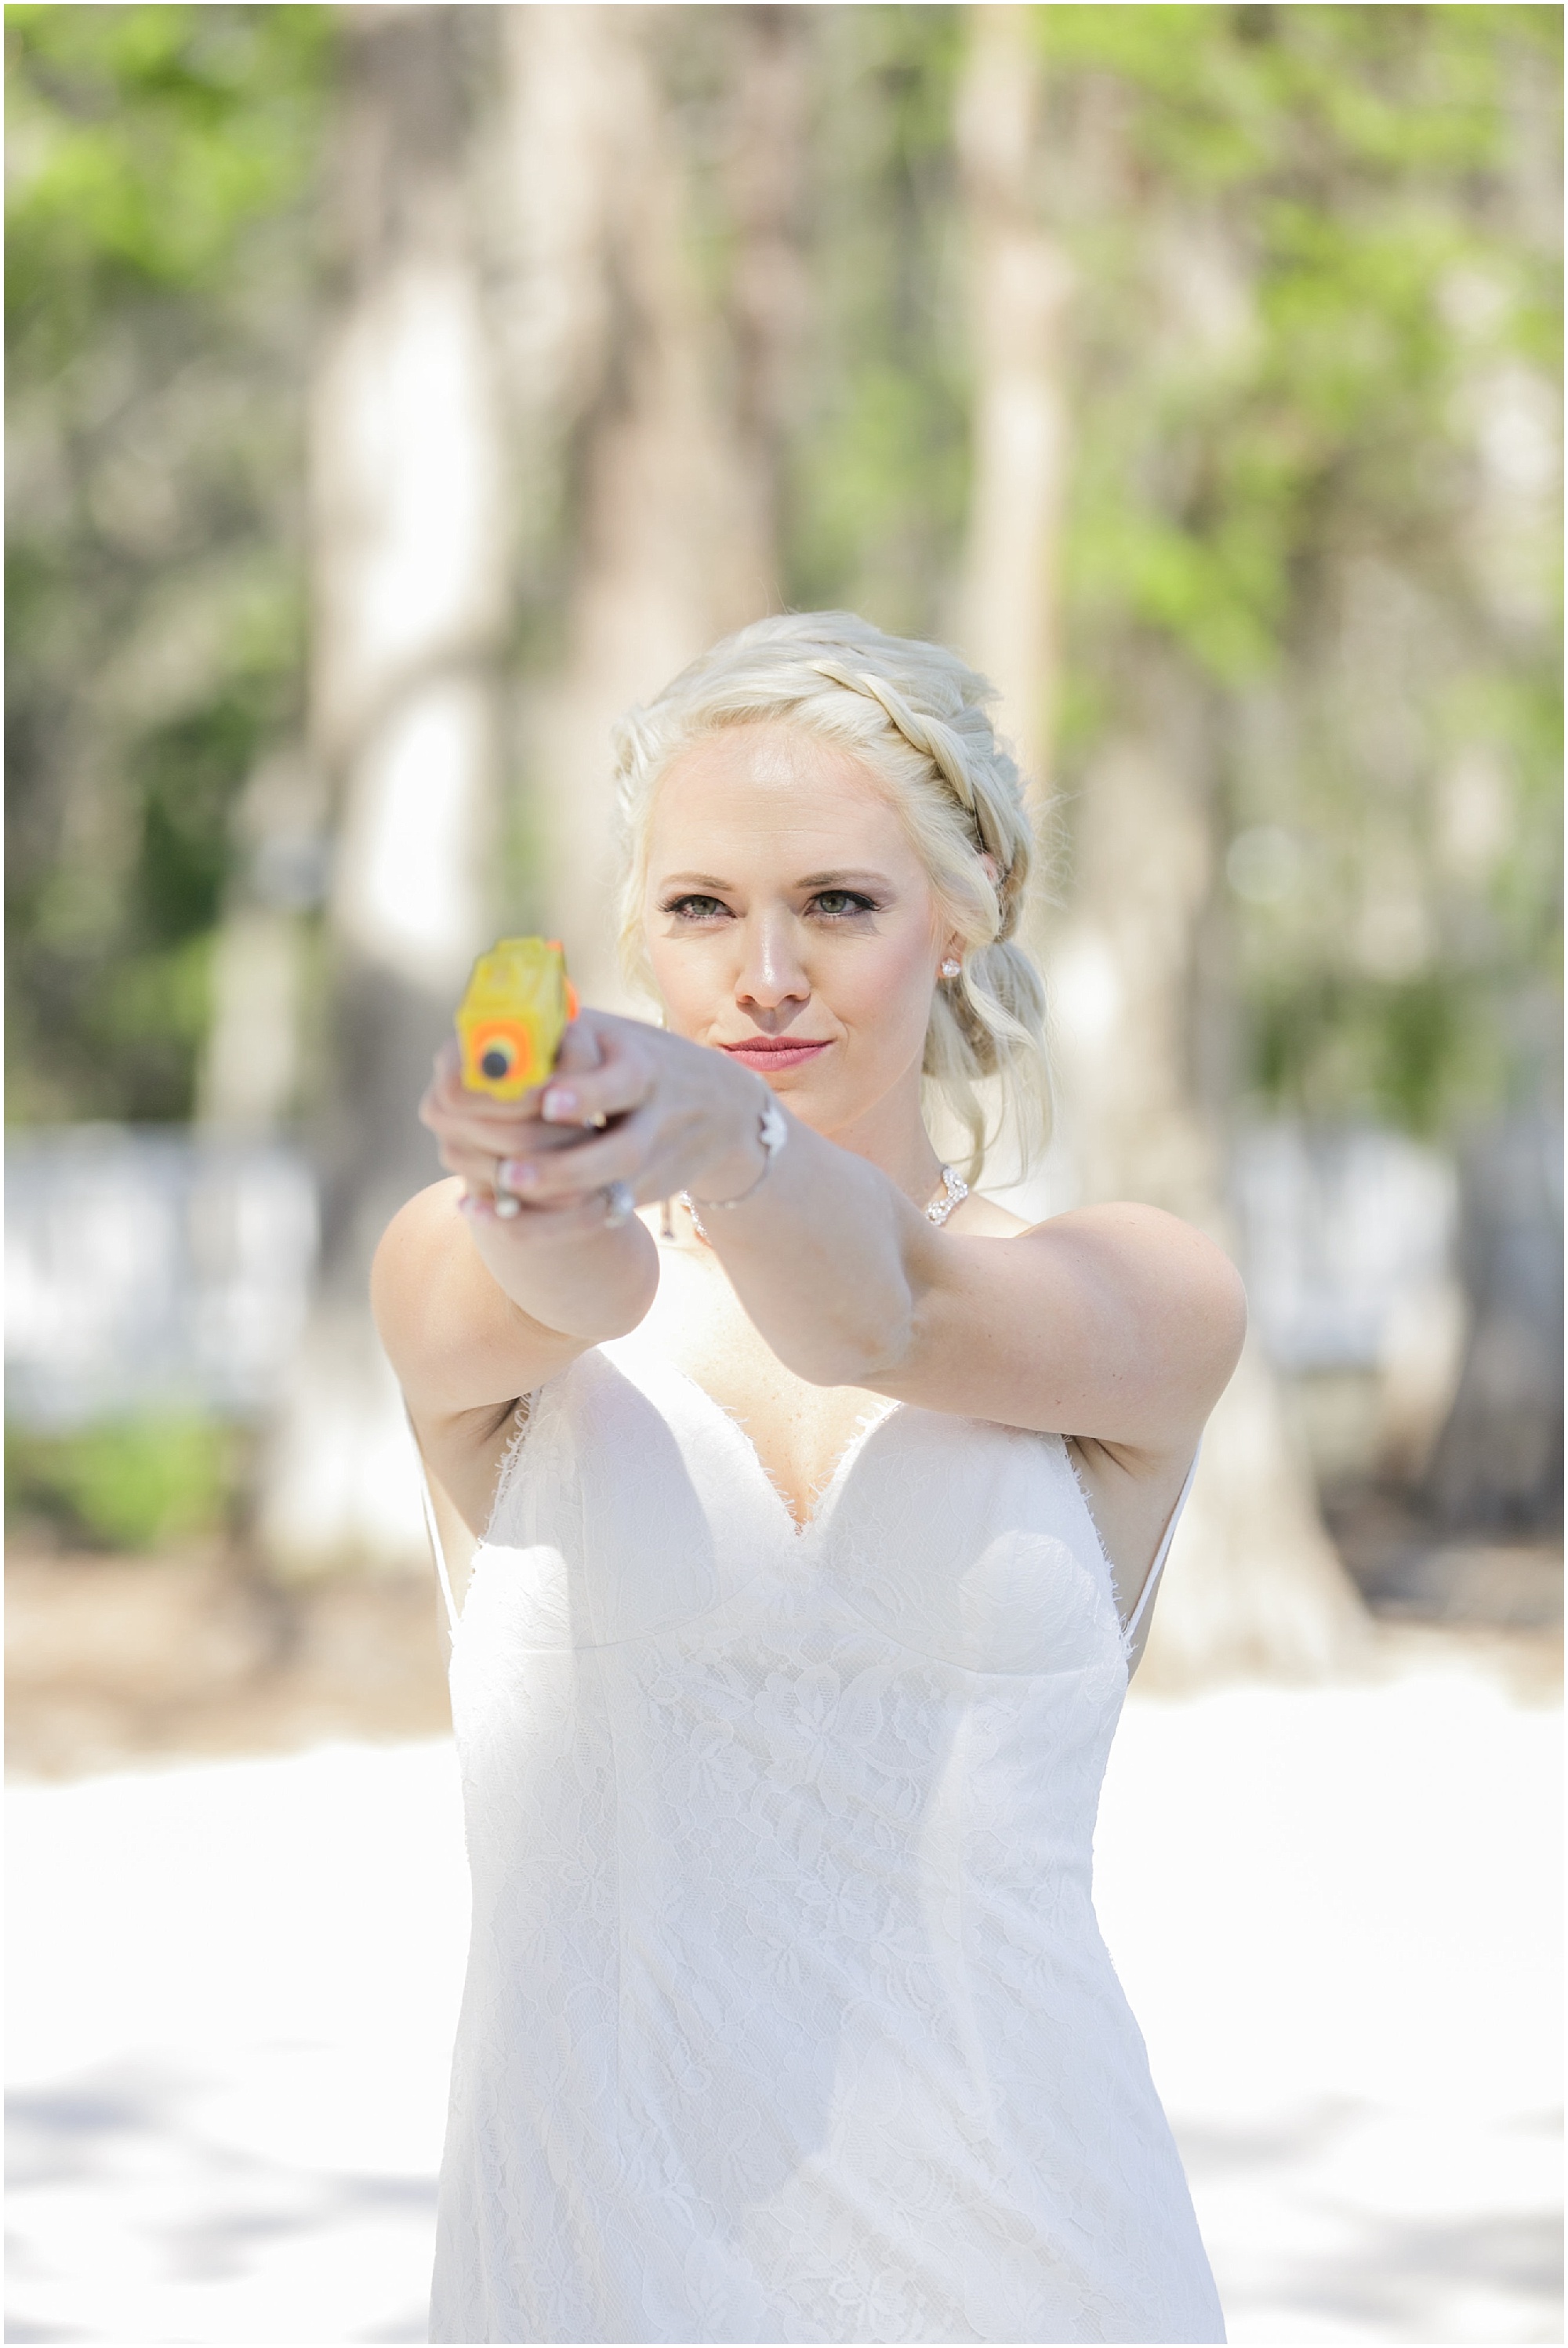 Bride getting ready to fire a nerf gun at groom during first look.